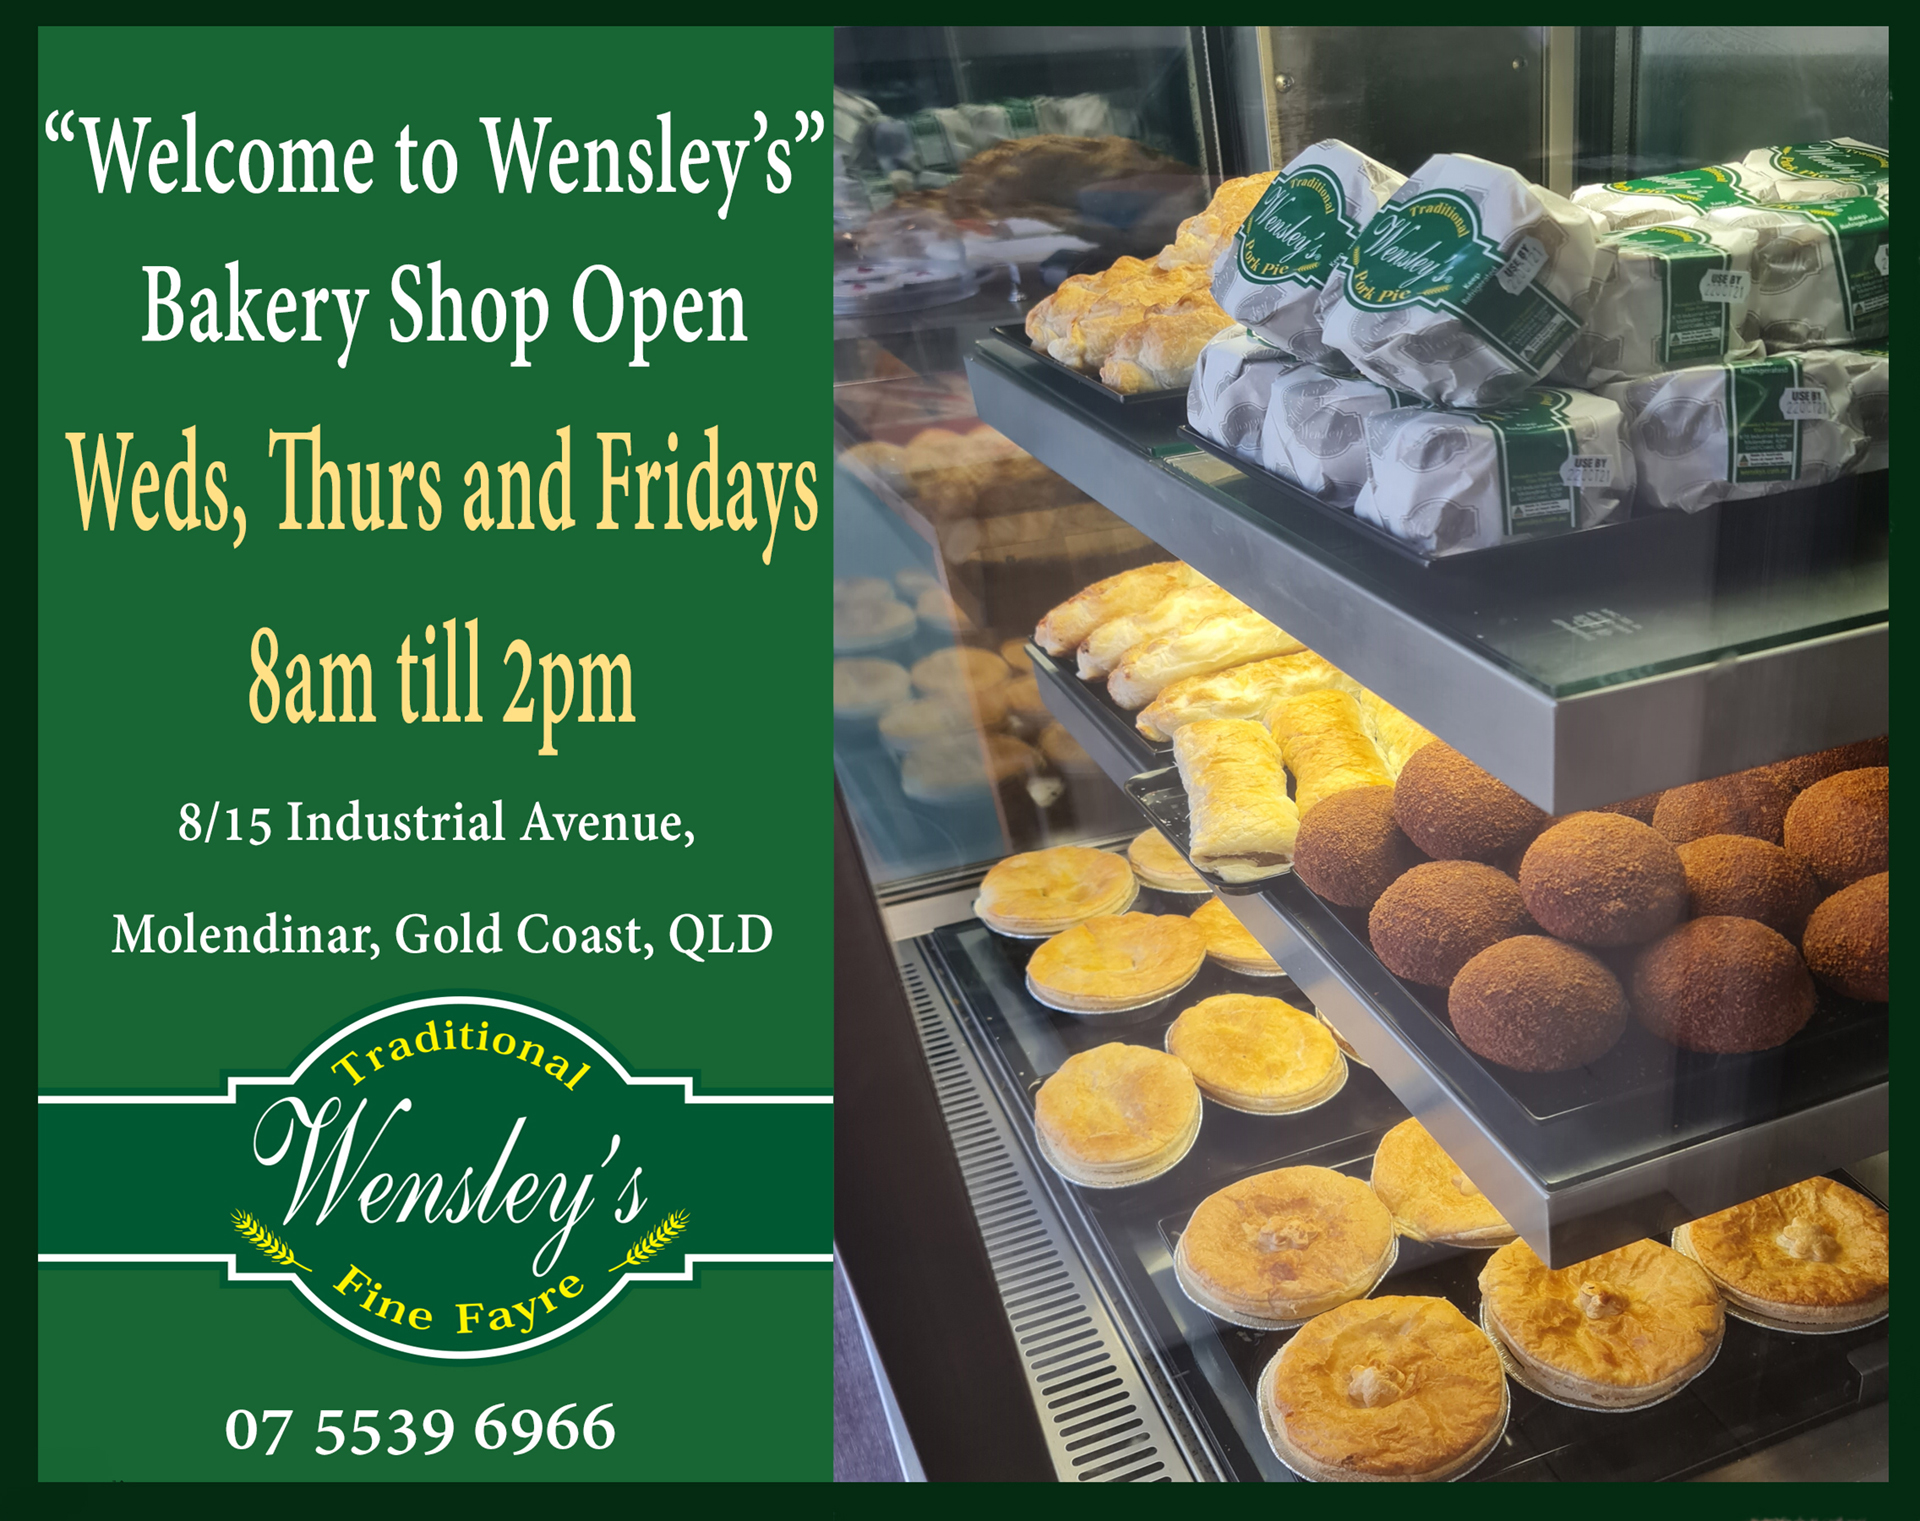 Bakery shop opening hours counter photo sign